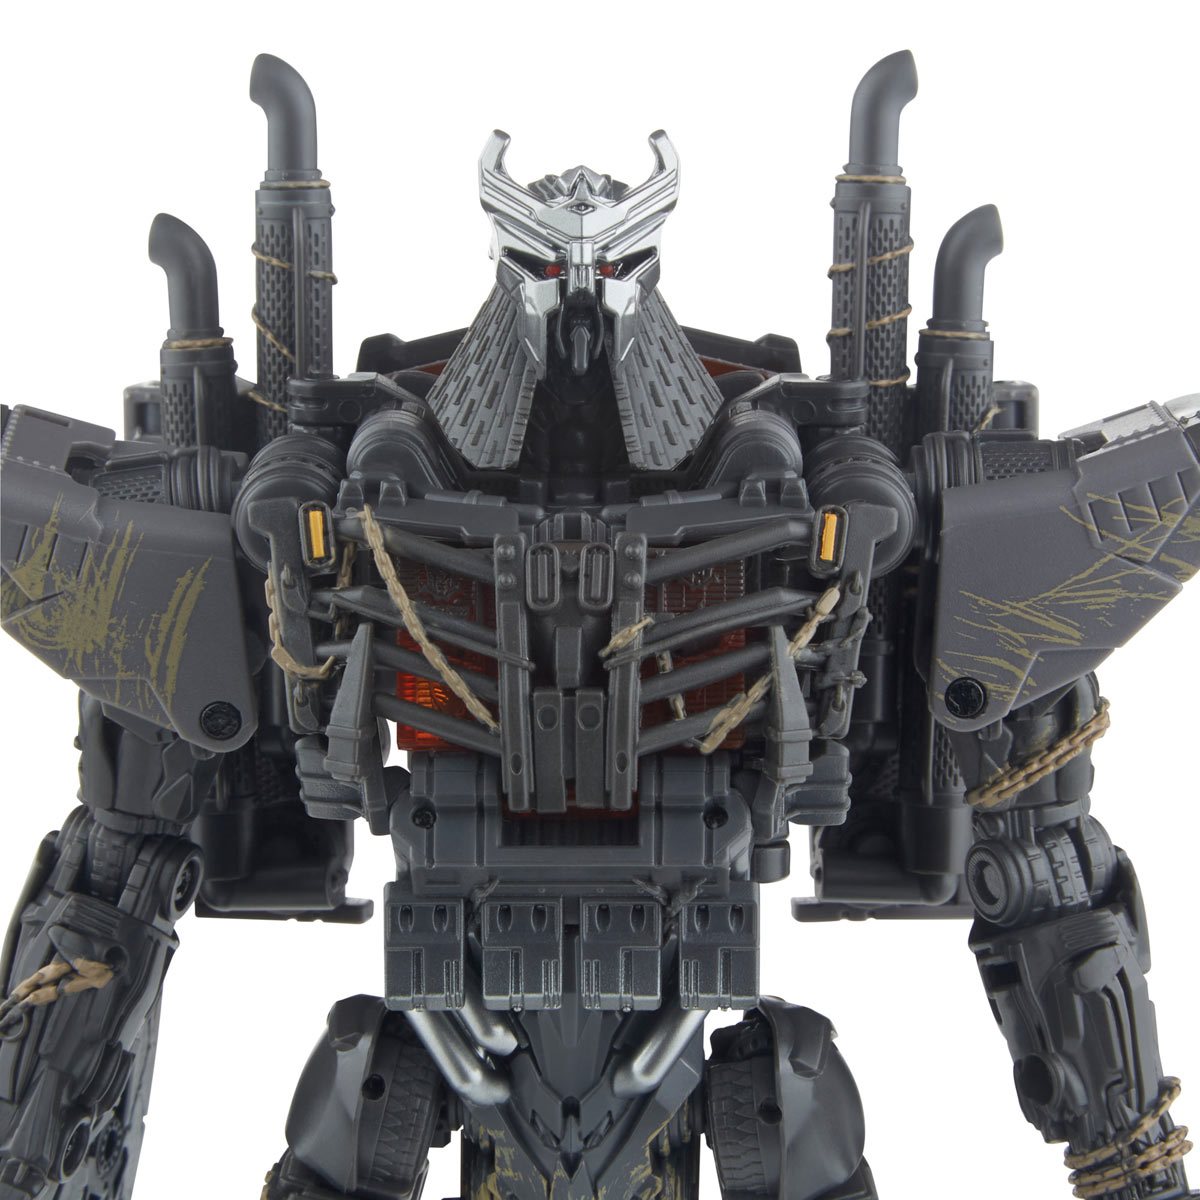 Transformers Studio Series Leader Transformers: Rise of the Beasts